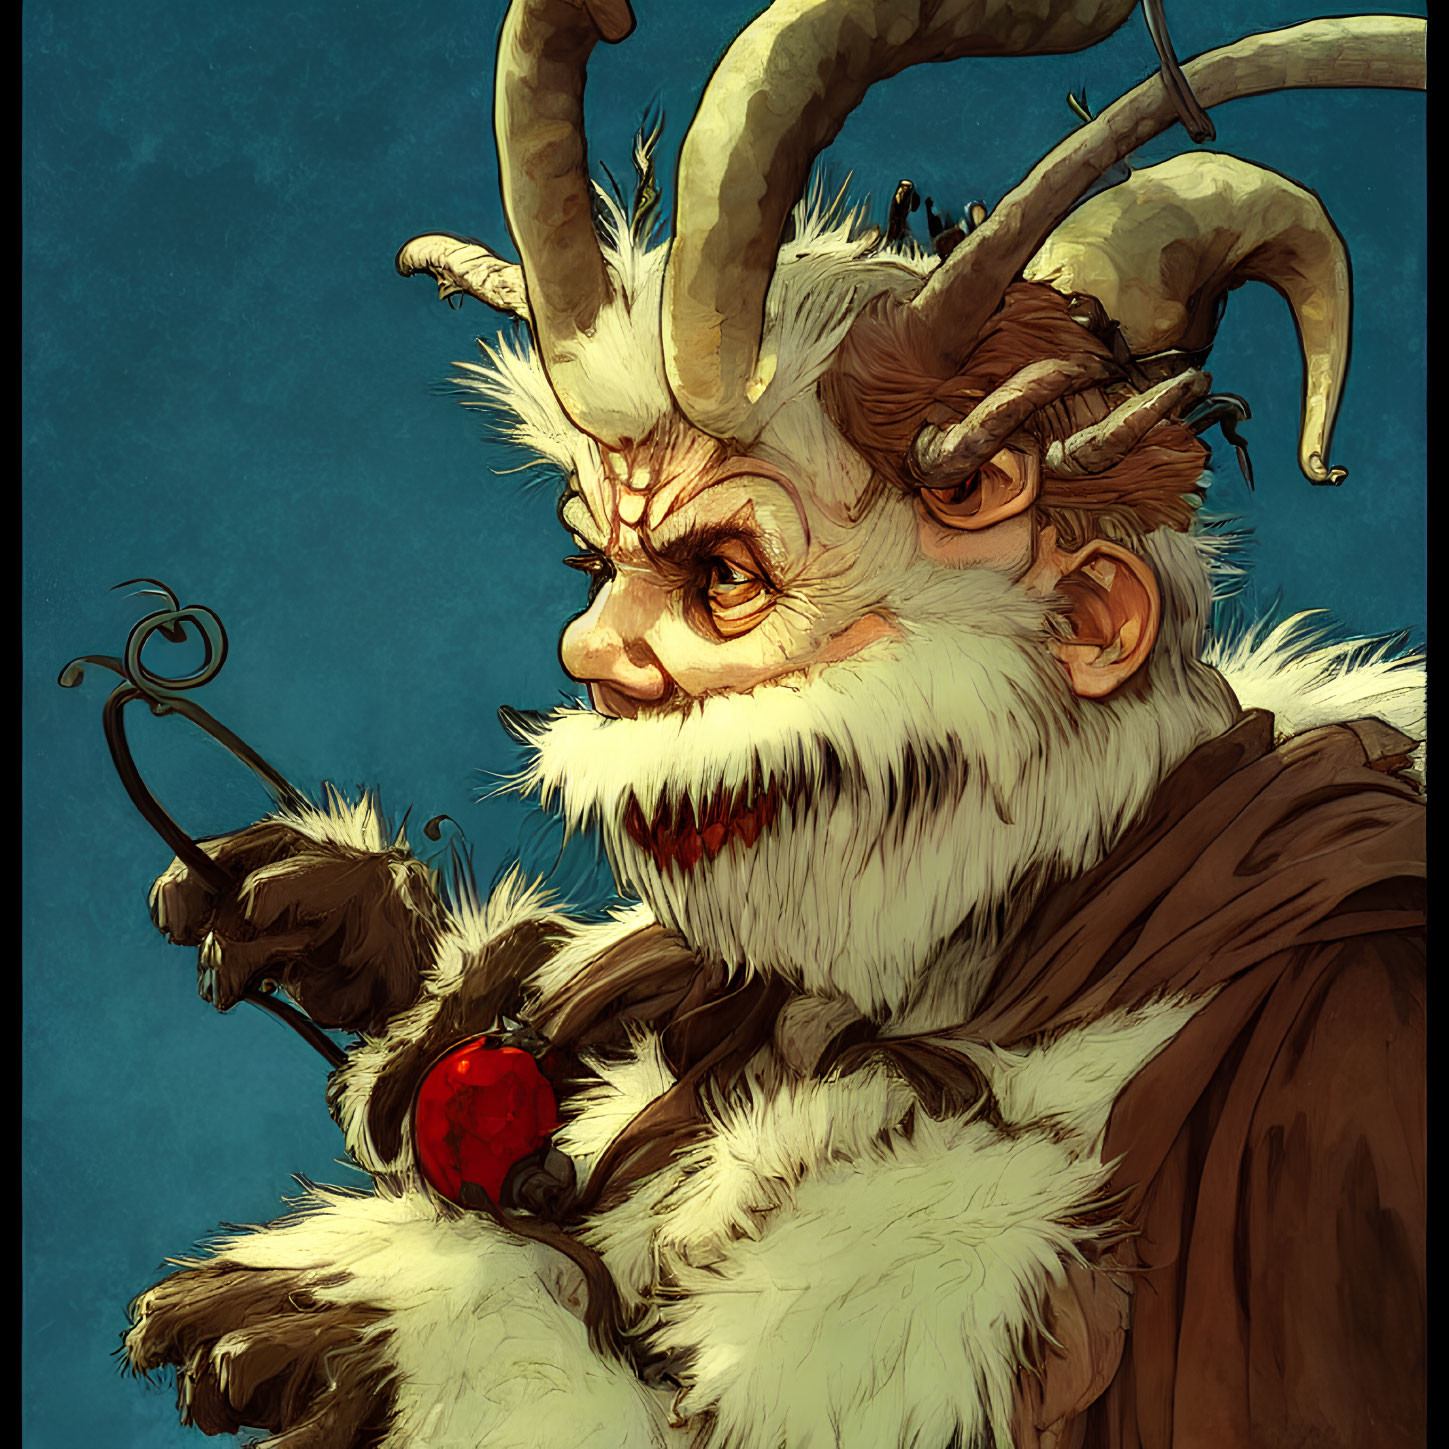 Fantasy creature with goat-like horns and red orb.